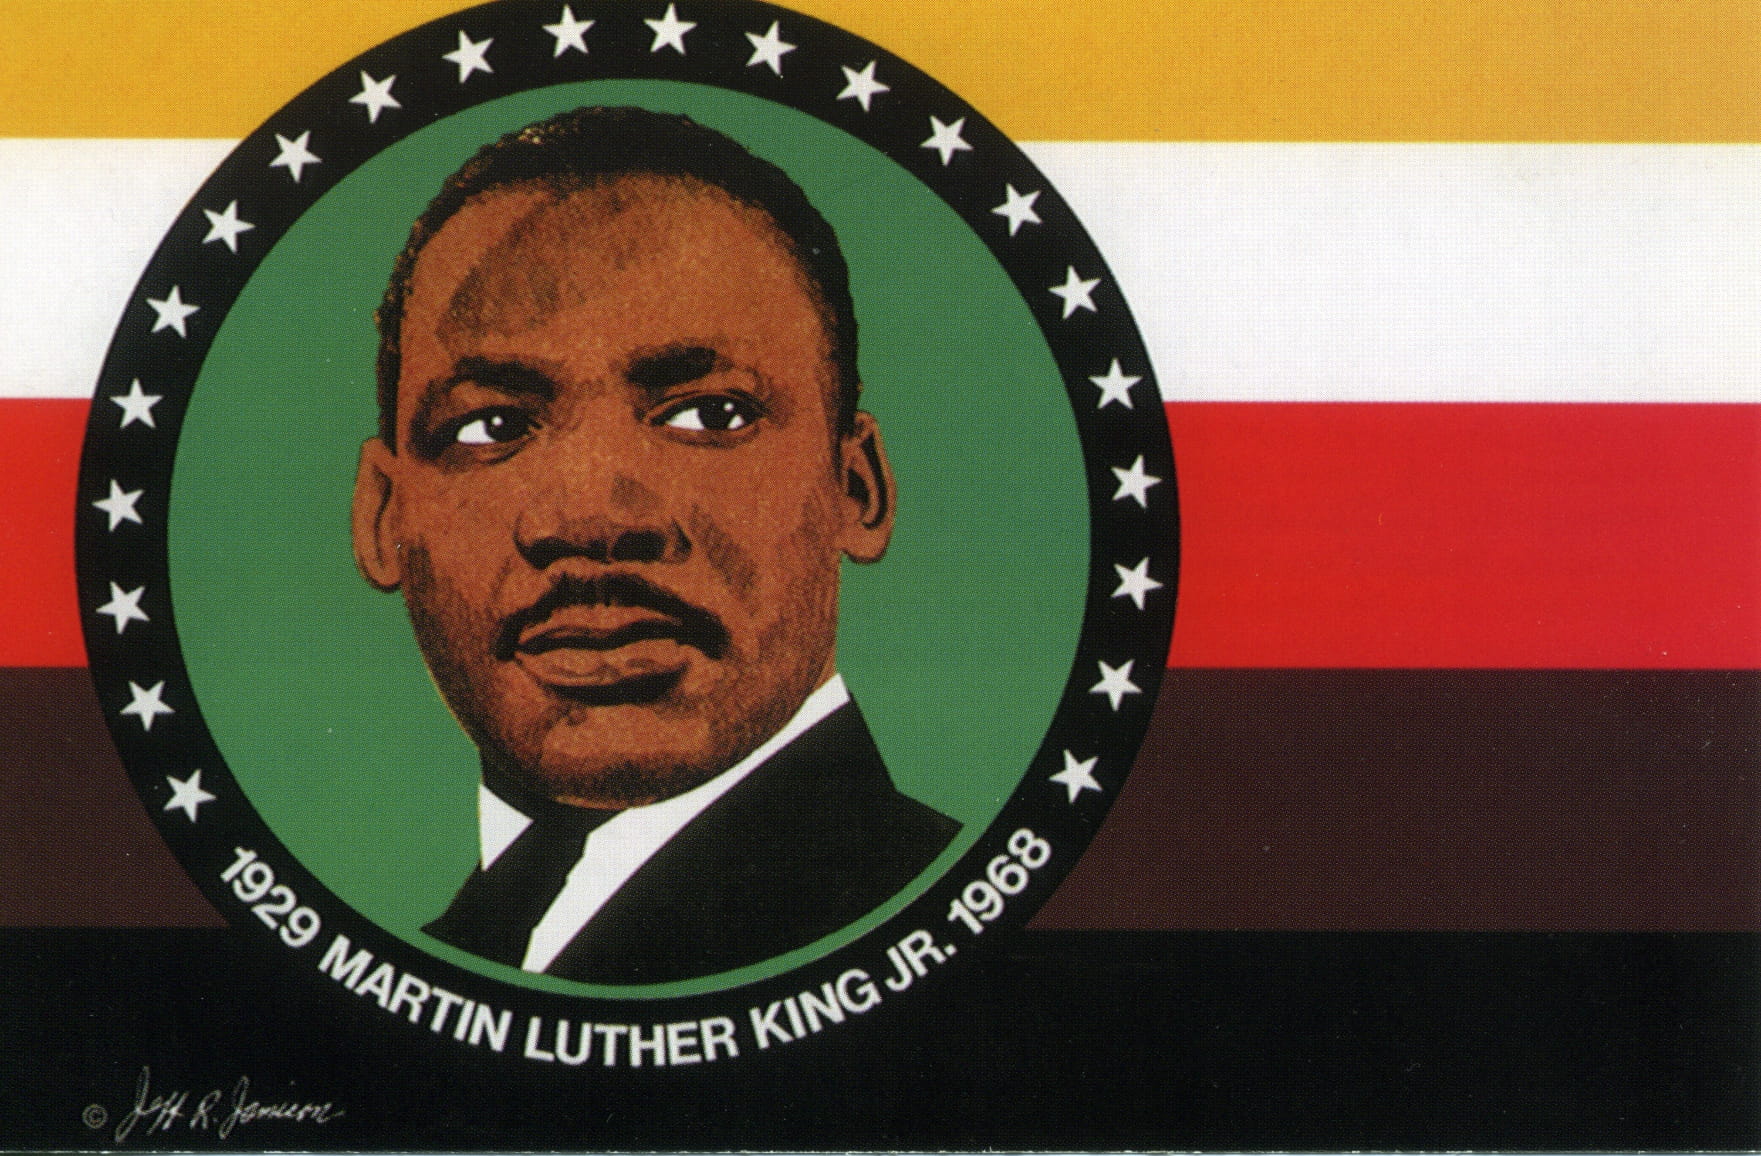 Mayor Nutter, Councilwoman Blackwell to Raise Flag at Drexel Honoring Martin Luther King Jr.